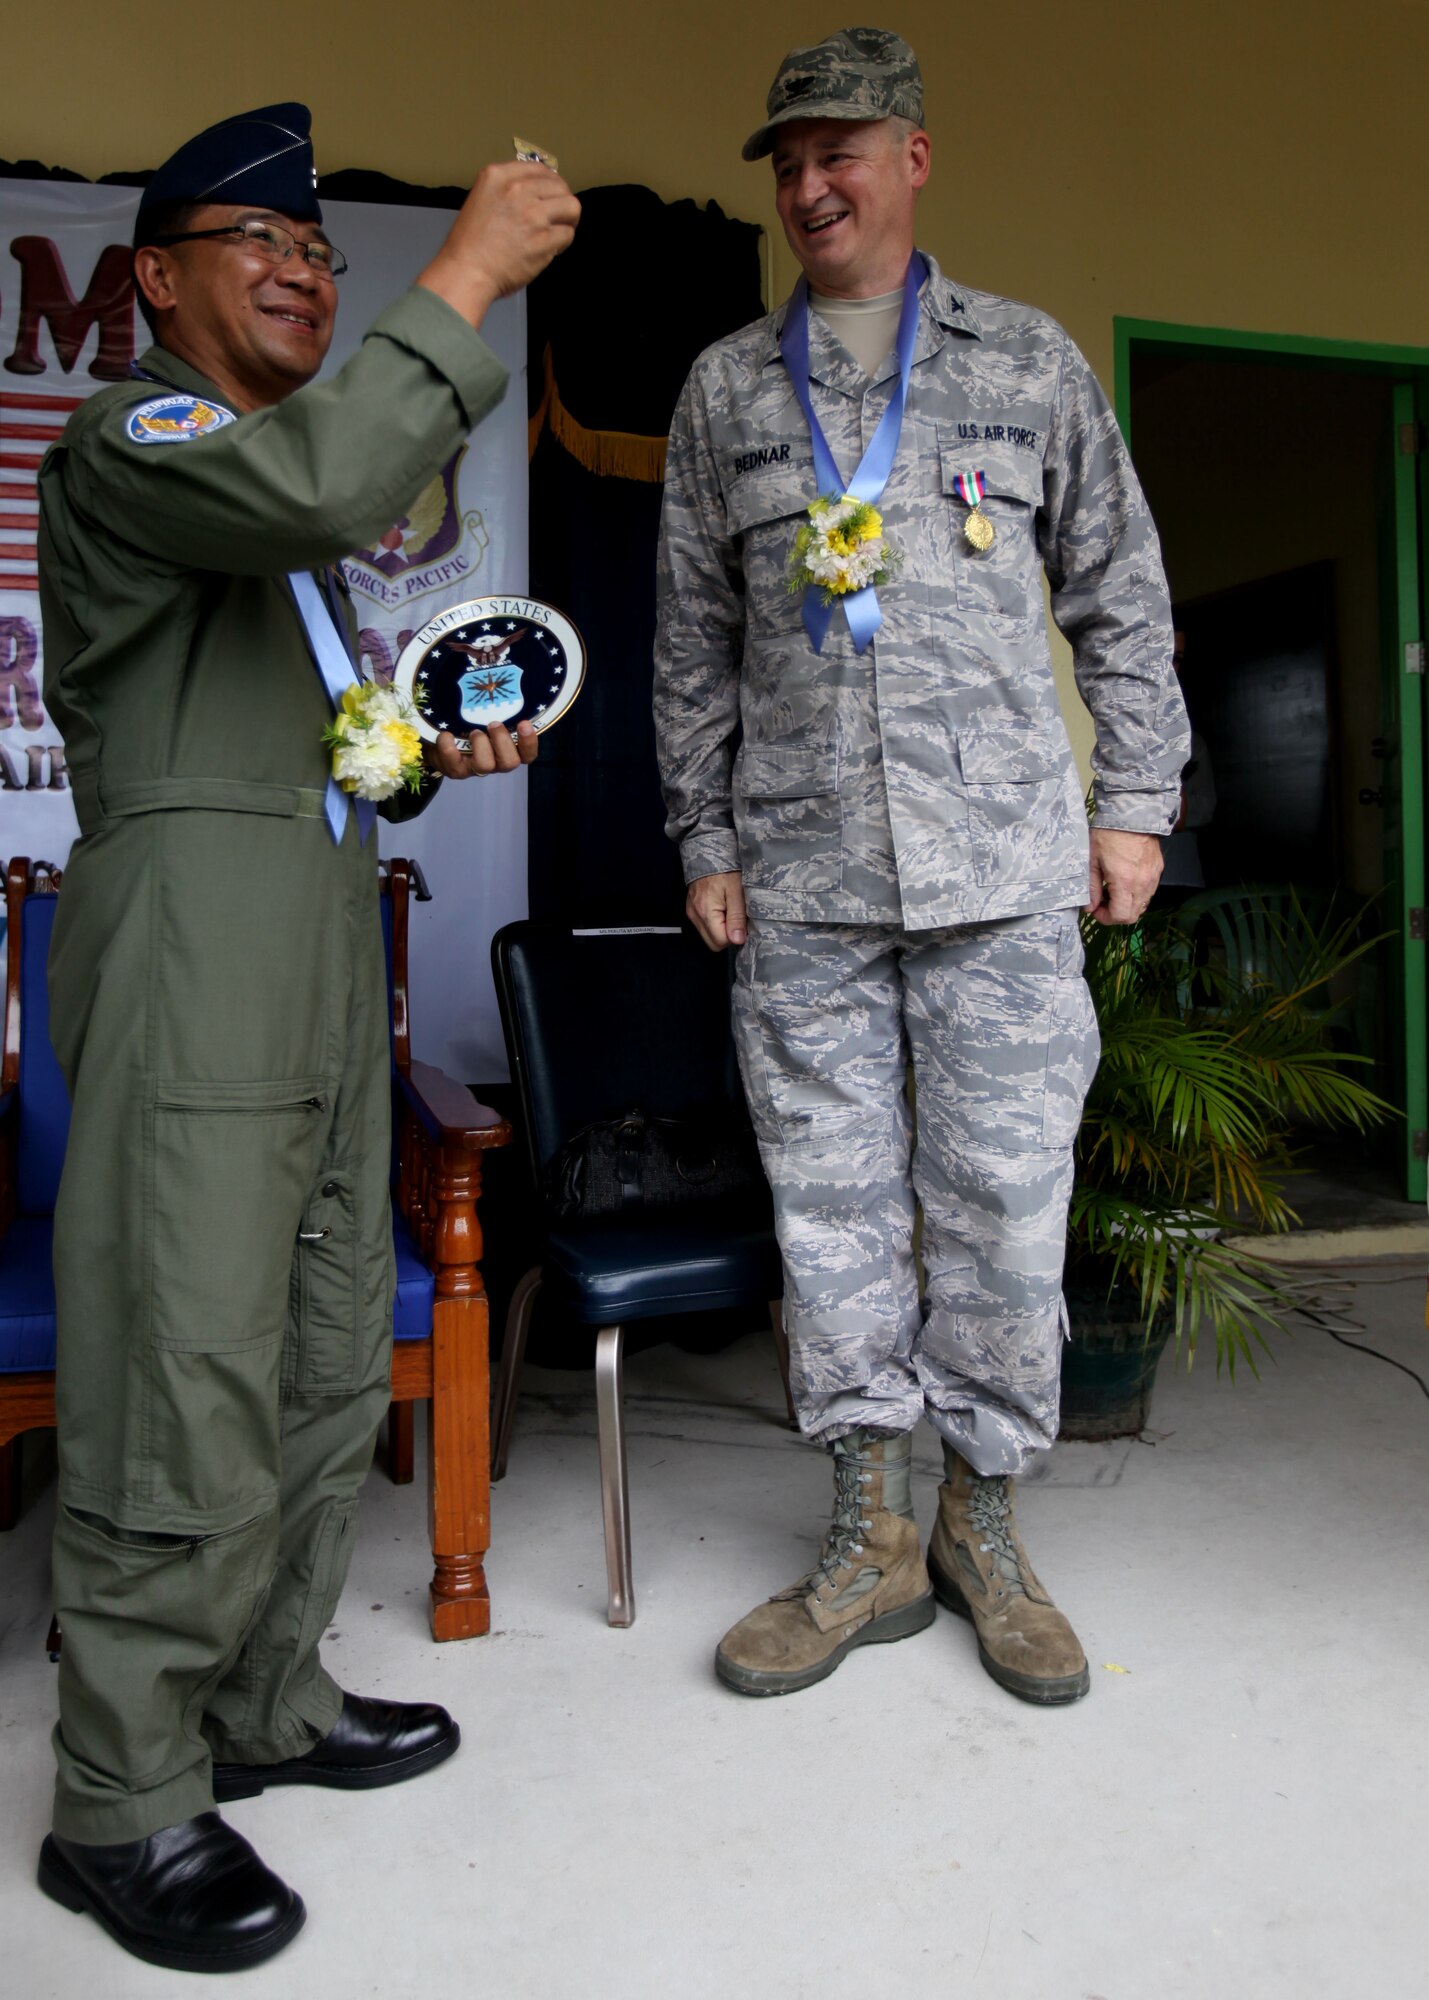 U.S. Air Force Col Mark Bednar presents Republic of the
Philippines Air Force MGen Ricardo Banayat with a
coin and engraved plate as a token of gratitude during a
dedication ceremony at Clark Air Force Base, Republic
of the Philippines on September 20, 2012. U.S. Air Force
Civil Engineering Squad 647 out of Joint Base Pearl
Harbor teamed up with the Republic of the Philippines
Air Force to build an addition onto a local schoolhouse
before dedicating it to the community. The U.S. military
and Republic of the Philippines military work together
to strengthen interoperability between the Philippine
and U.S. government. (U.S. Marine Corps photo by LCpl
Katelyn Hunter/Released).